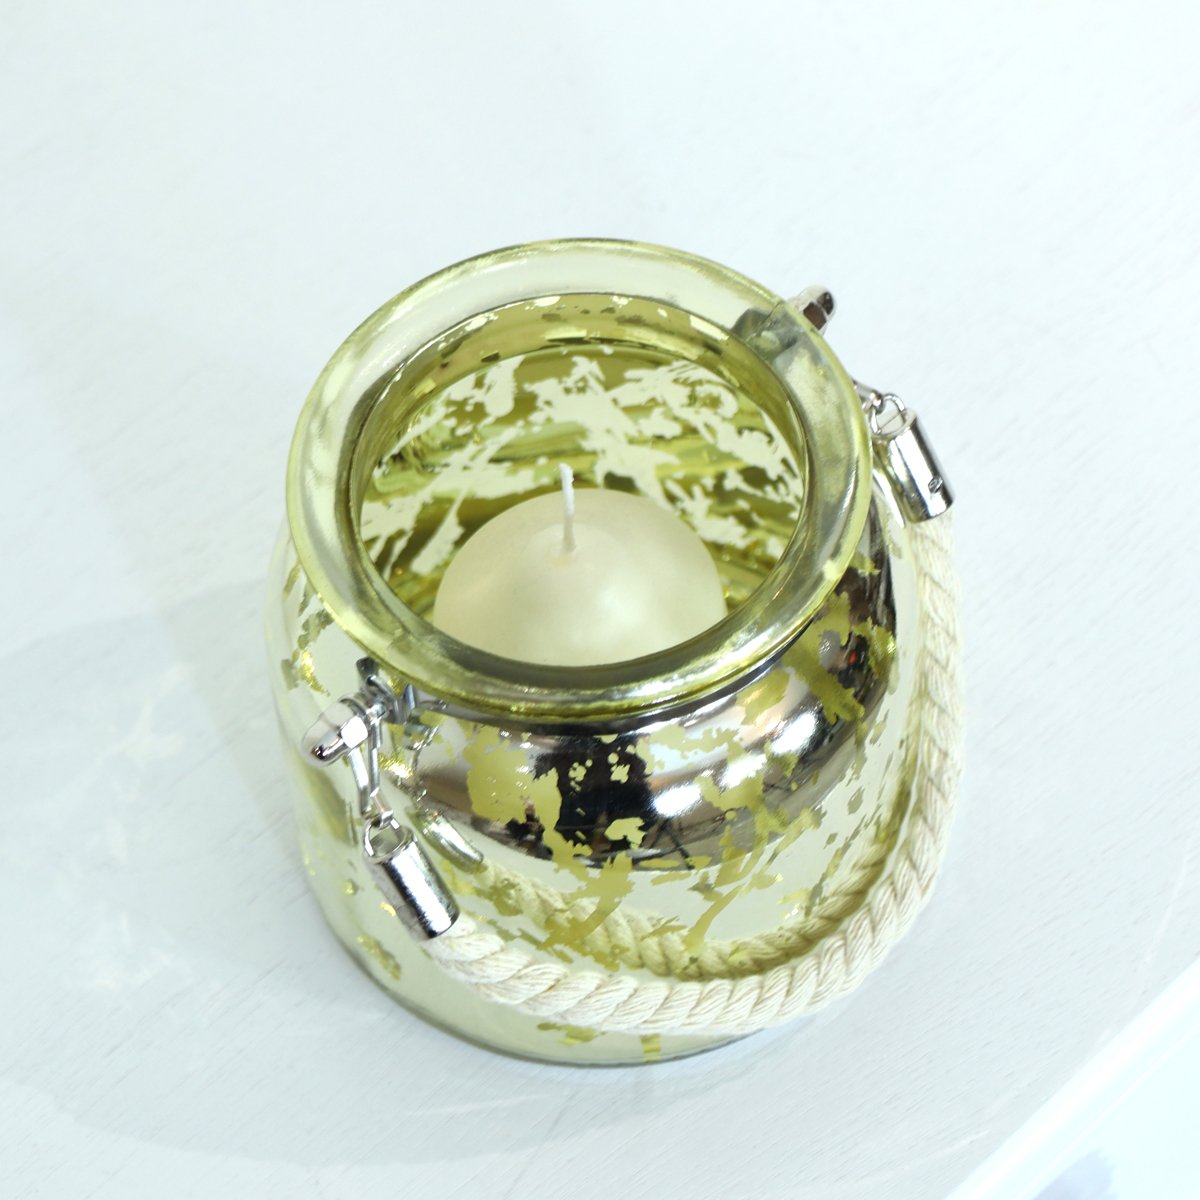 Gold Mottled Glass Candle Holder with Rope Handle